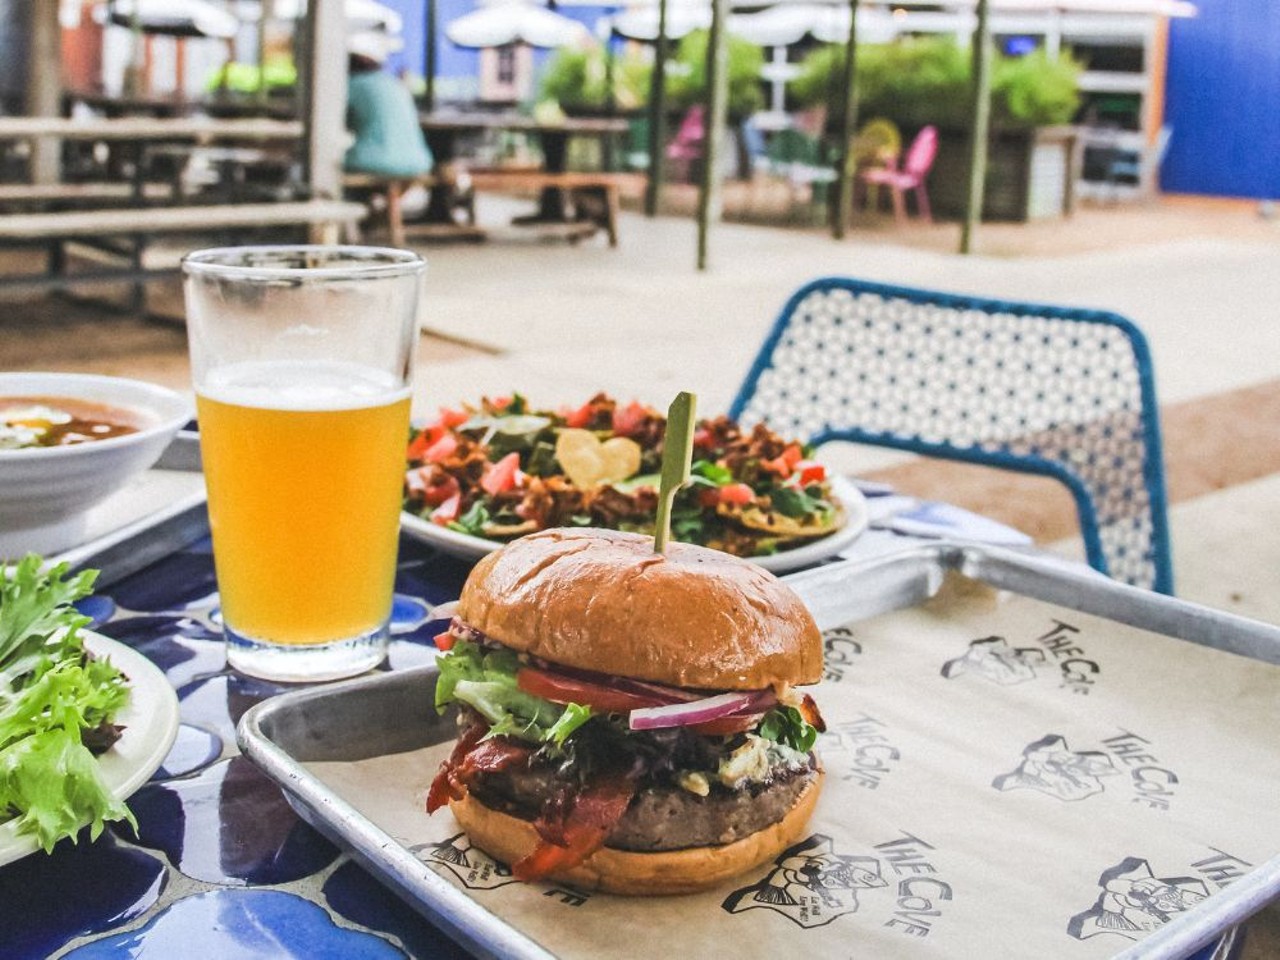 	The Cove
606 W. Cypress St., (210) 227-2683, thecove.us
Over 50 craft brews on tap and a dog friendly patio make this the perfect spot for a chill afternoon enjoying the San Antonian weather. Grab your pup or pals and some brews and check out live music on Thursdays.